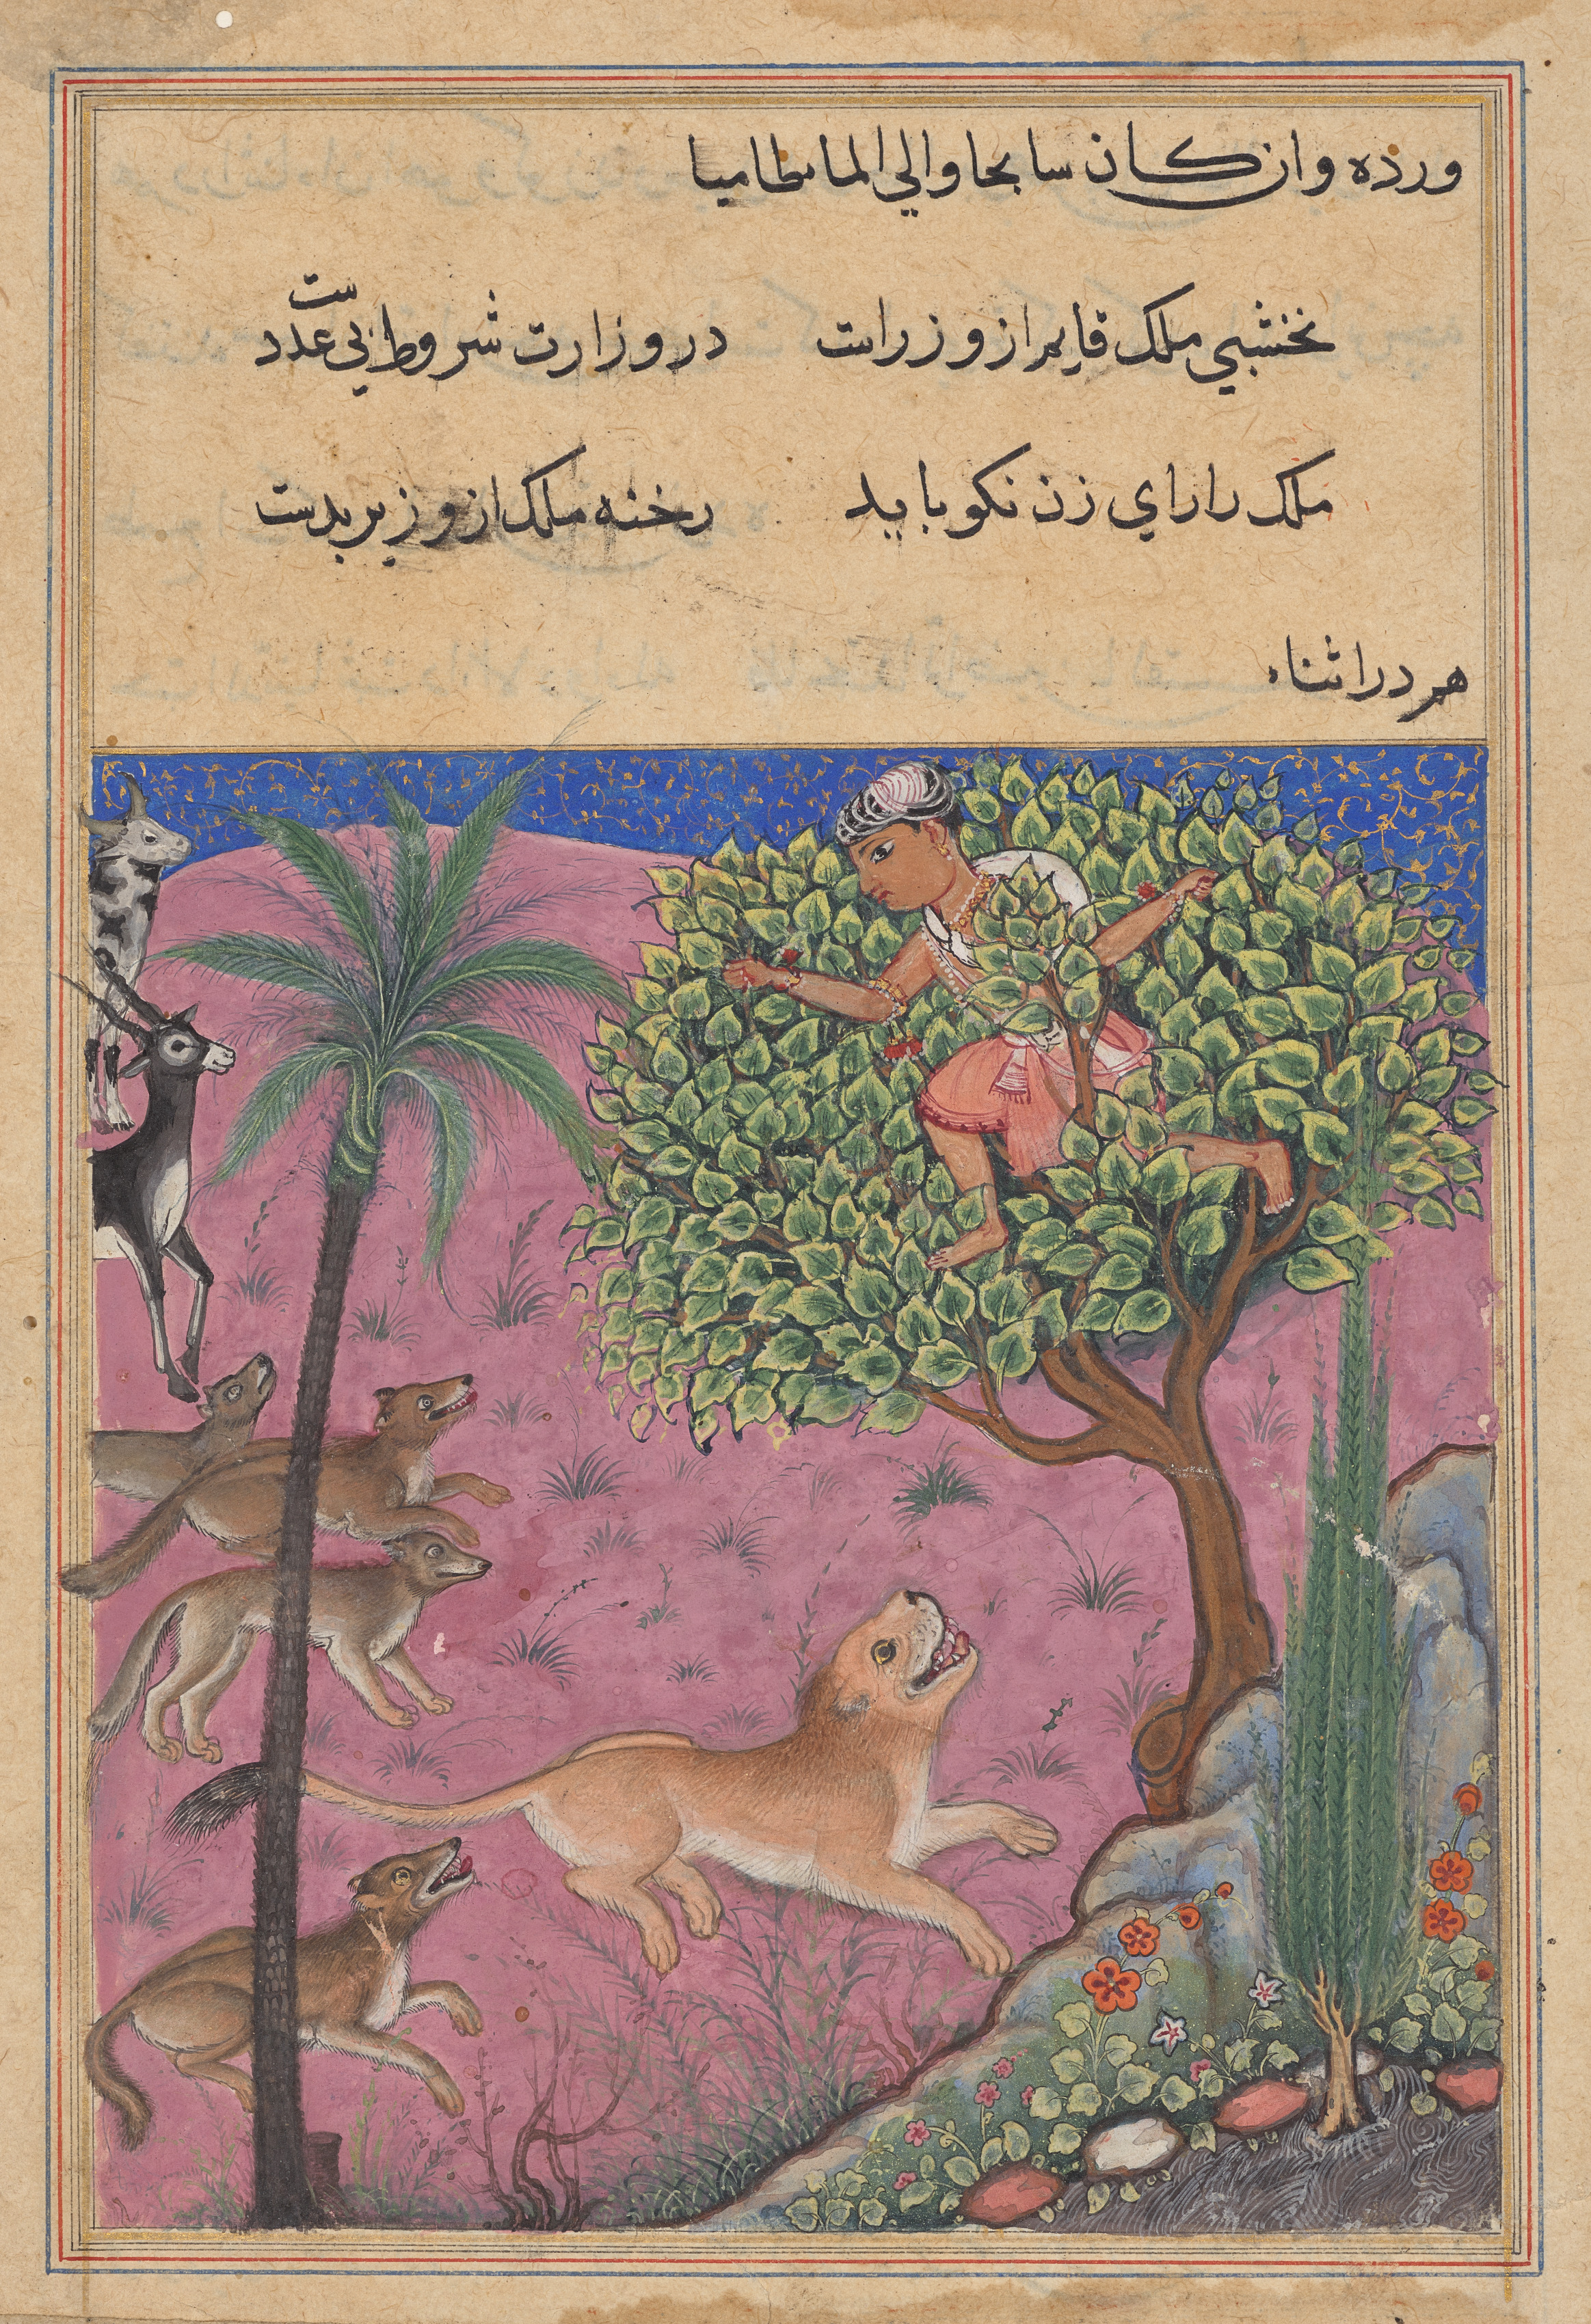 The wolf and the jackal, serving as viziers, instigate the lion who pursues the Brahman up a tree, from a Tuti-nama (Tales of a Parrot): Twenty-first Night